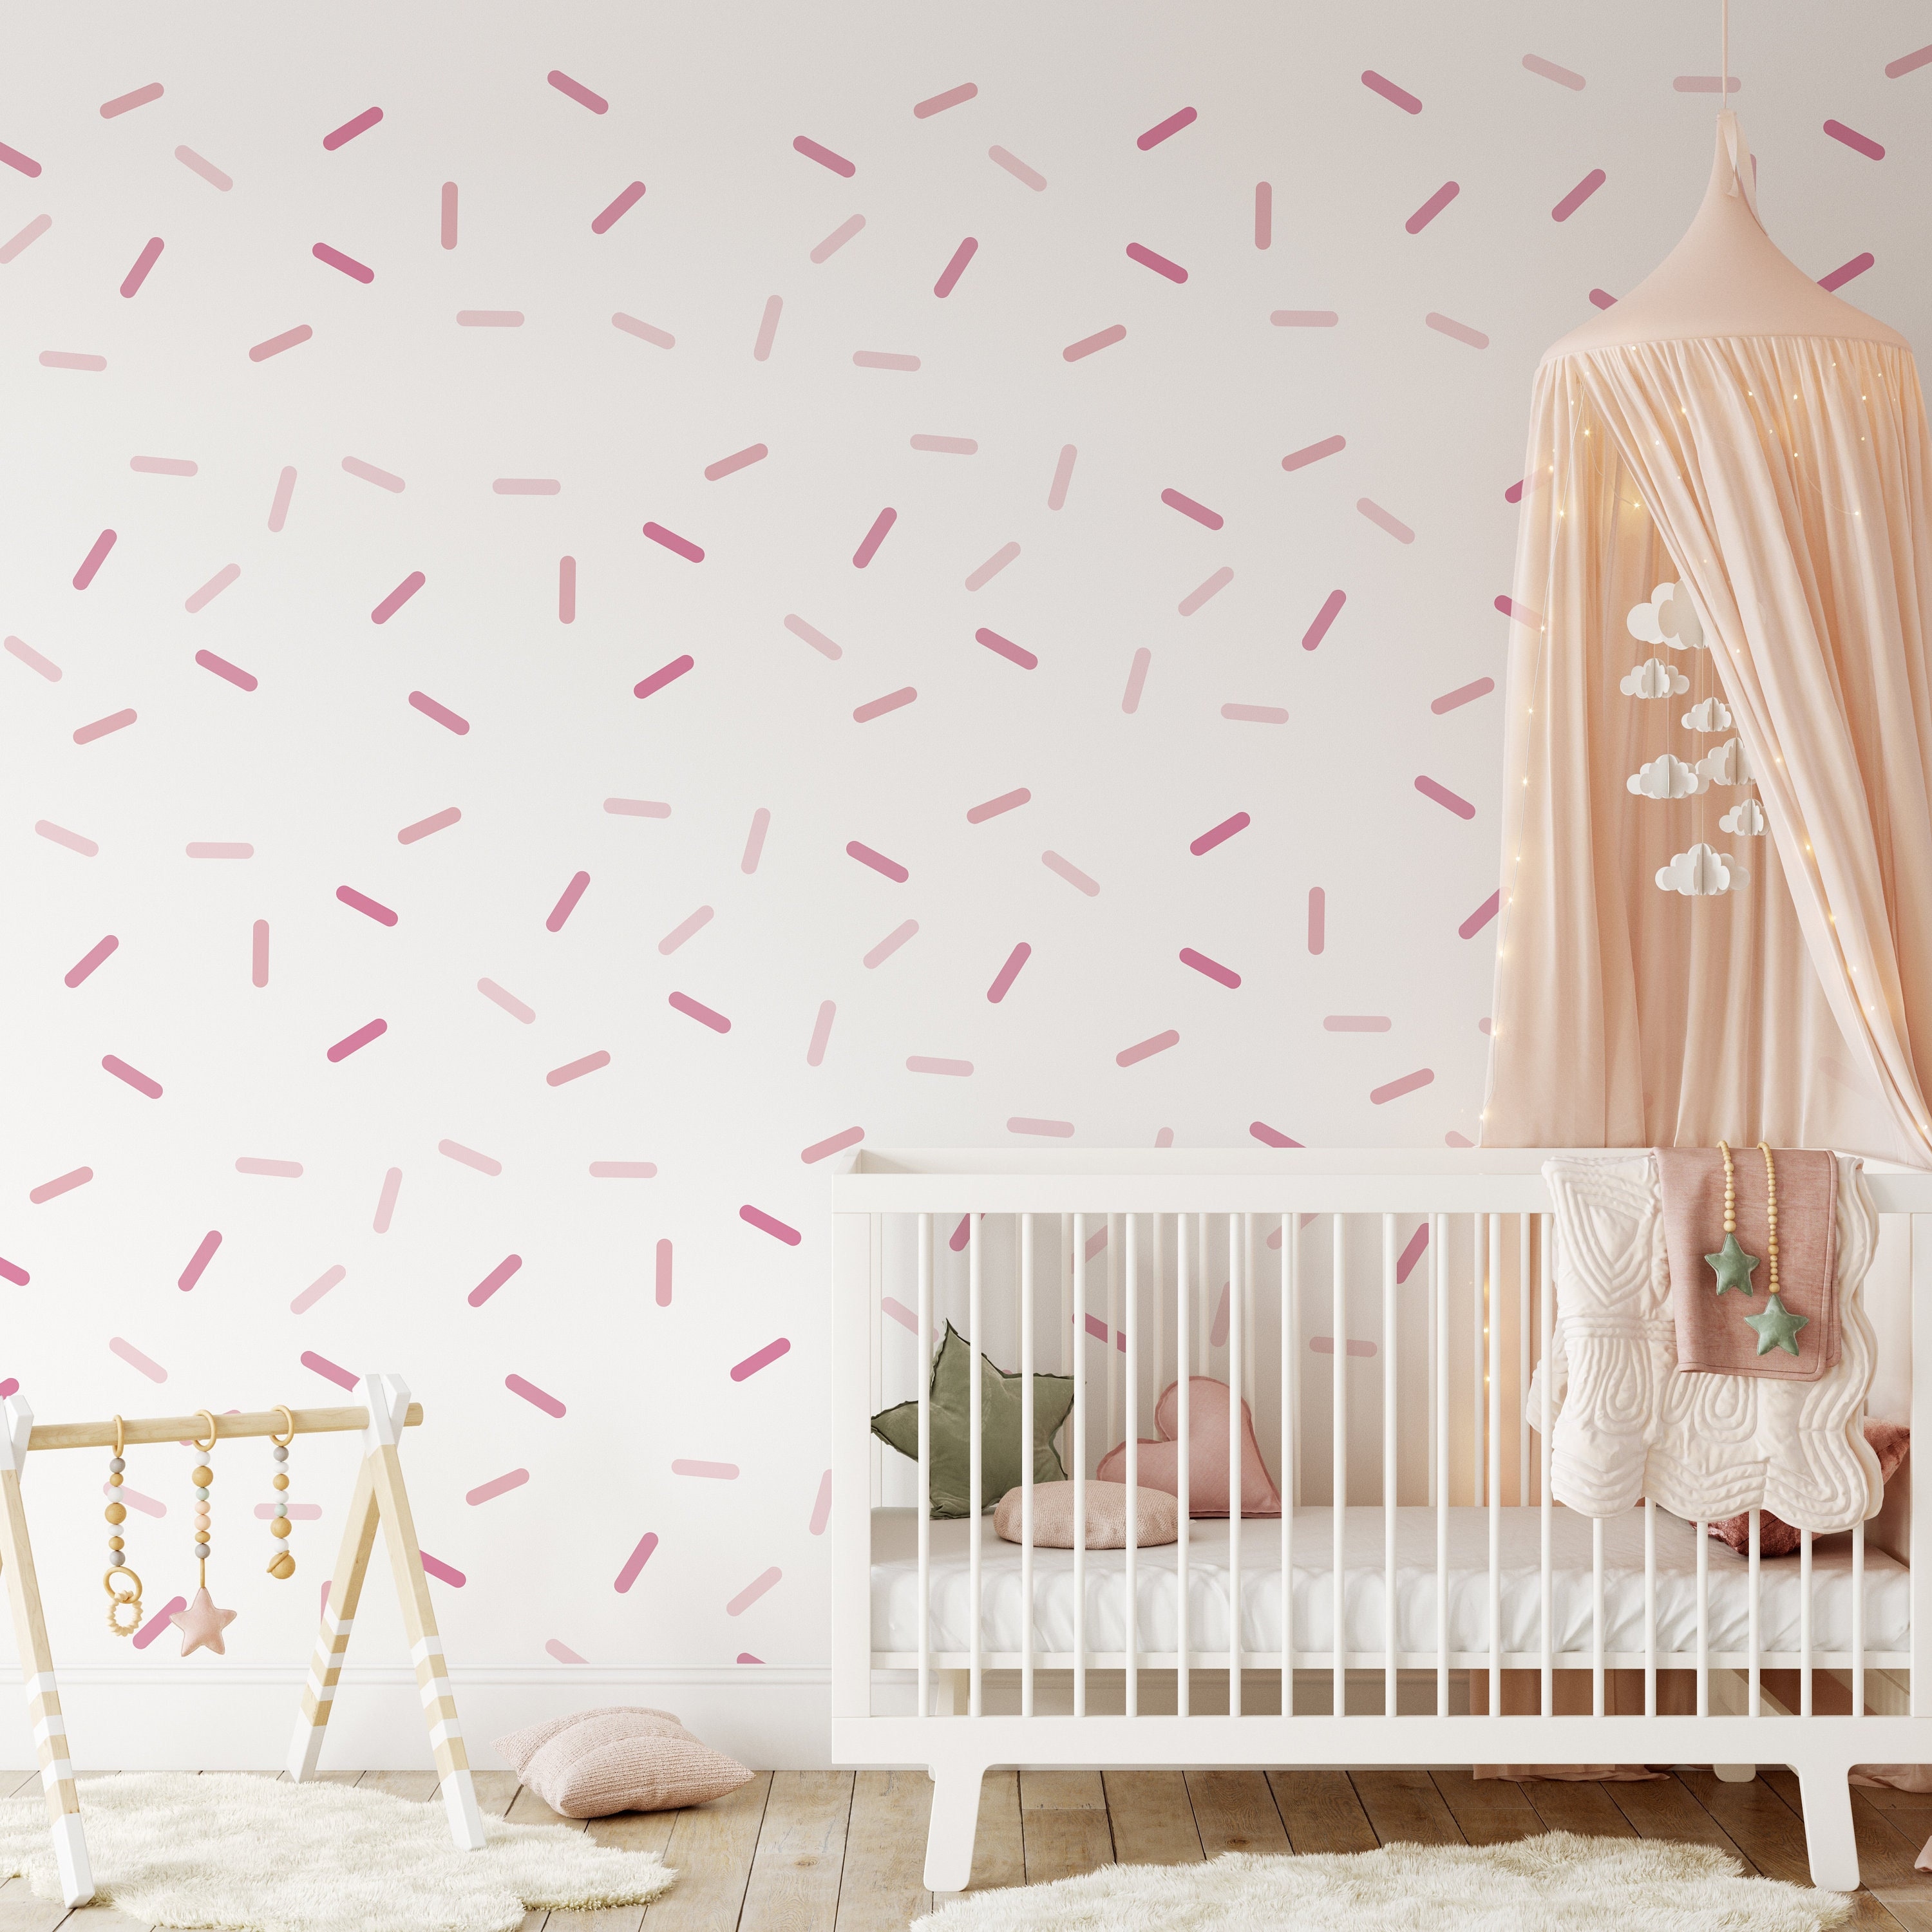 Pink Sprinkle Wall Decal Stickers Confetti Wall Decor Etsy